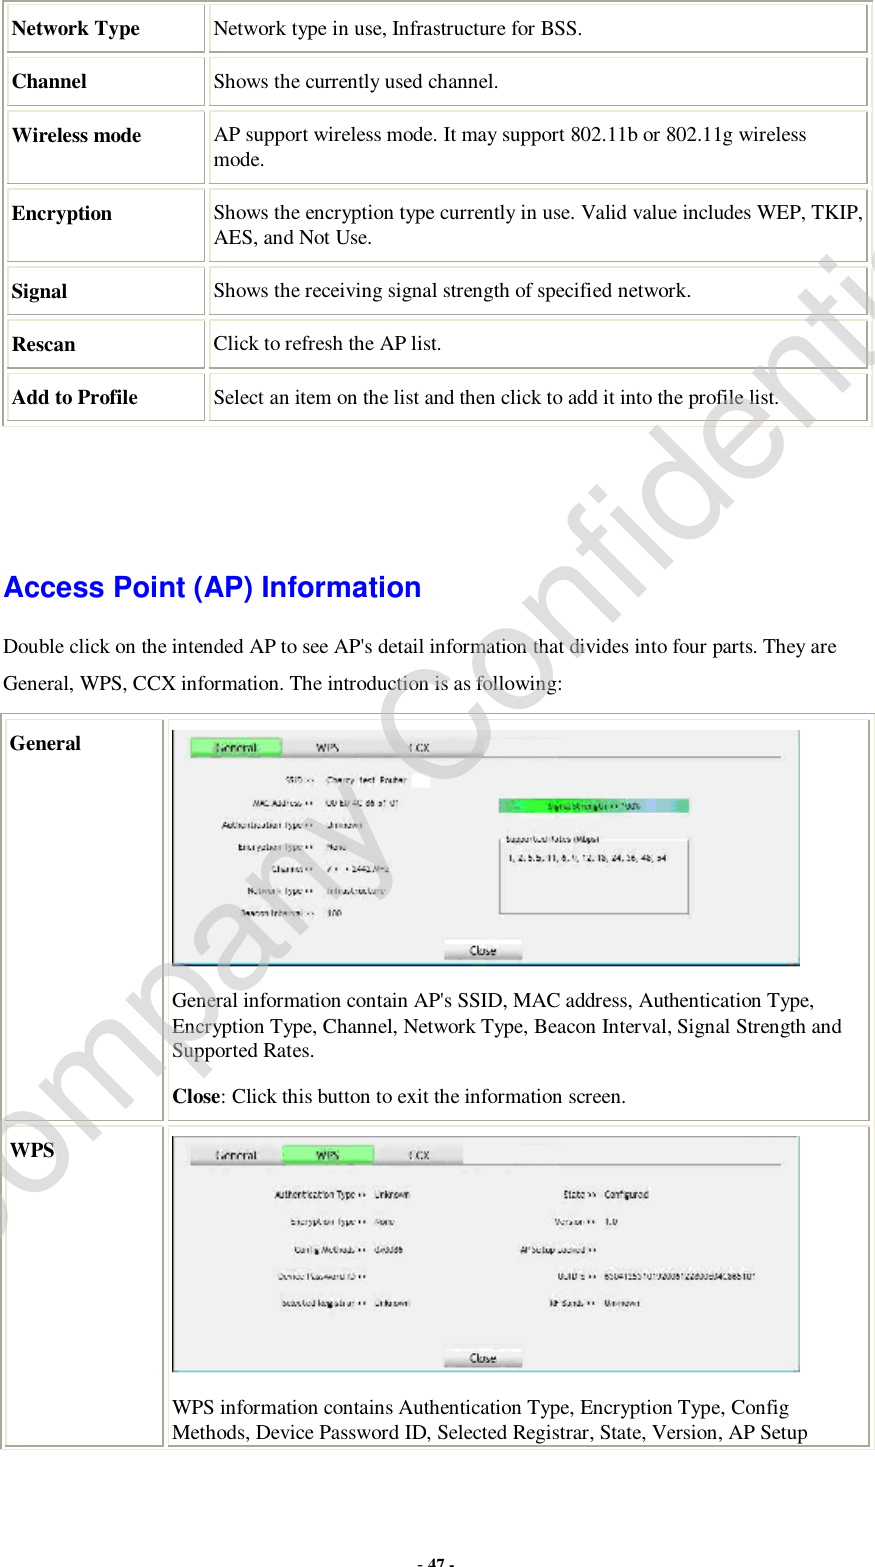  - 47 - Network Type Network type in use, Infrastructure for BSS. Channel  Shows the currently used channel. Wireless mode  AP support wireless mode. It may support 802.11b or 802.11g wireless mode. Encryption  Shows the encryption type currently in use. Valid value includes WEP, TKIP, AES, and Not Use. Signal  Shows the receiving signal strength of specified network. Rescan  Click to refresh the AP list. Add to Profile  Select an item on the list and then click to add it into the profile list.    Access Point (AP) Information Double click on the intended AP to see AP&apos;s detail information that divides into four parts. They are General, WPS, CCX information. The introduction is as following: General  General information contain AP&apos;s SSID, MAC address, Authentication Type, Encryption Type, Channel, Network Type, Beacon Interval, Signal Strength and Supported Rates. Close: Click this button to exit the information screen. WPS  WPS information contains Authentication Type, Encryption Type, Config Methods, Device Password ID, Selected Registrar, State, Version, AP Setup Company Confidential